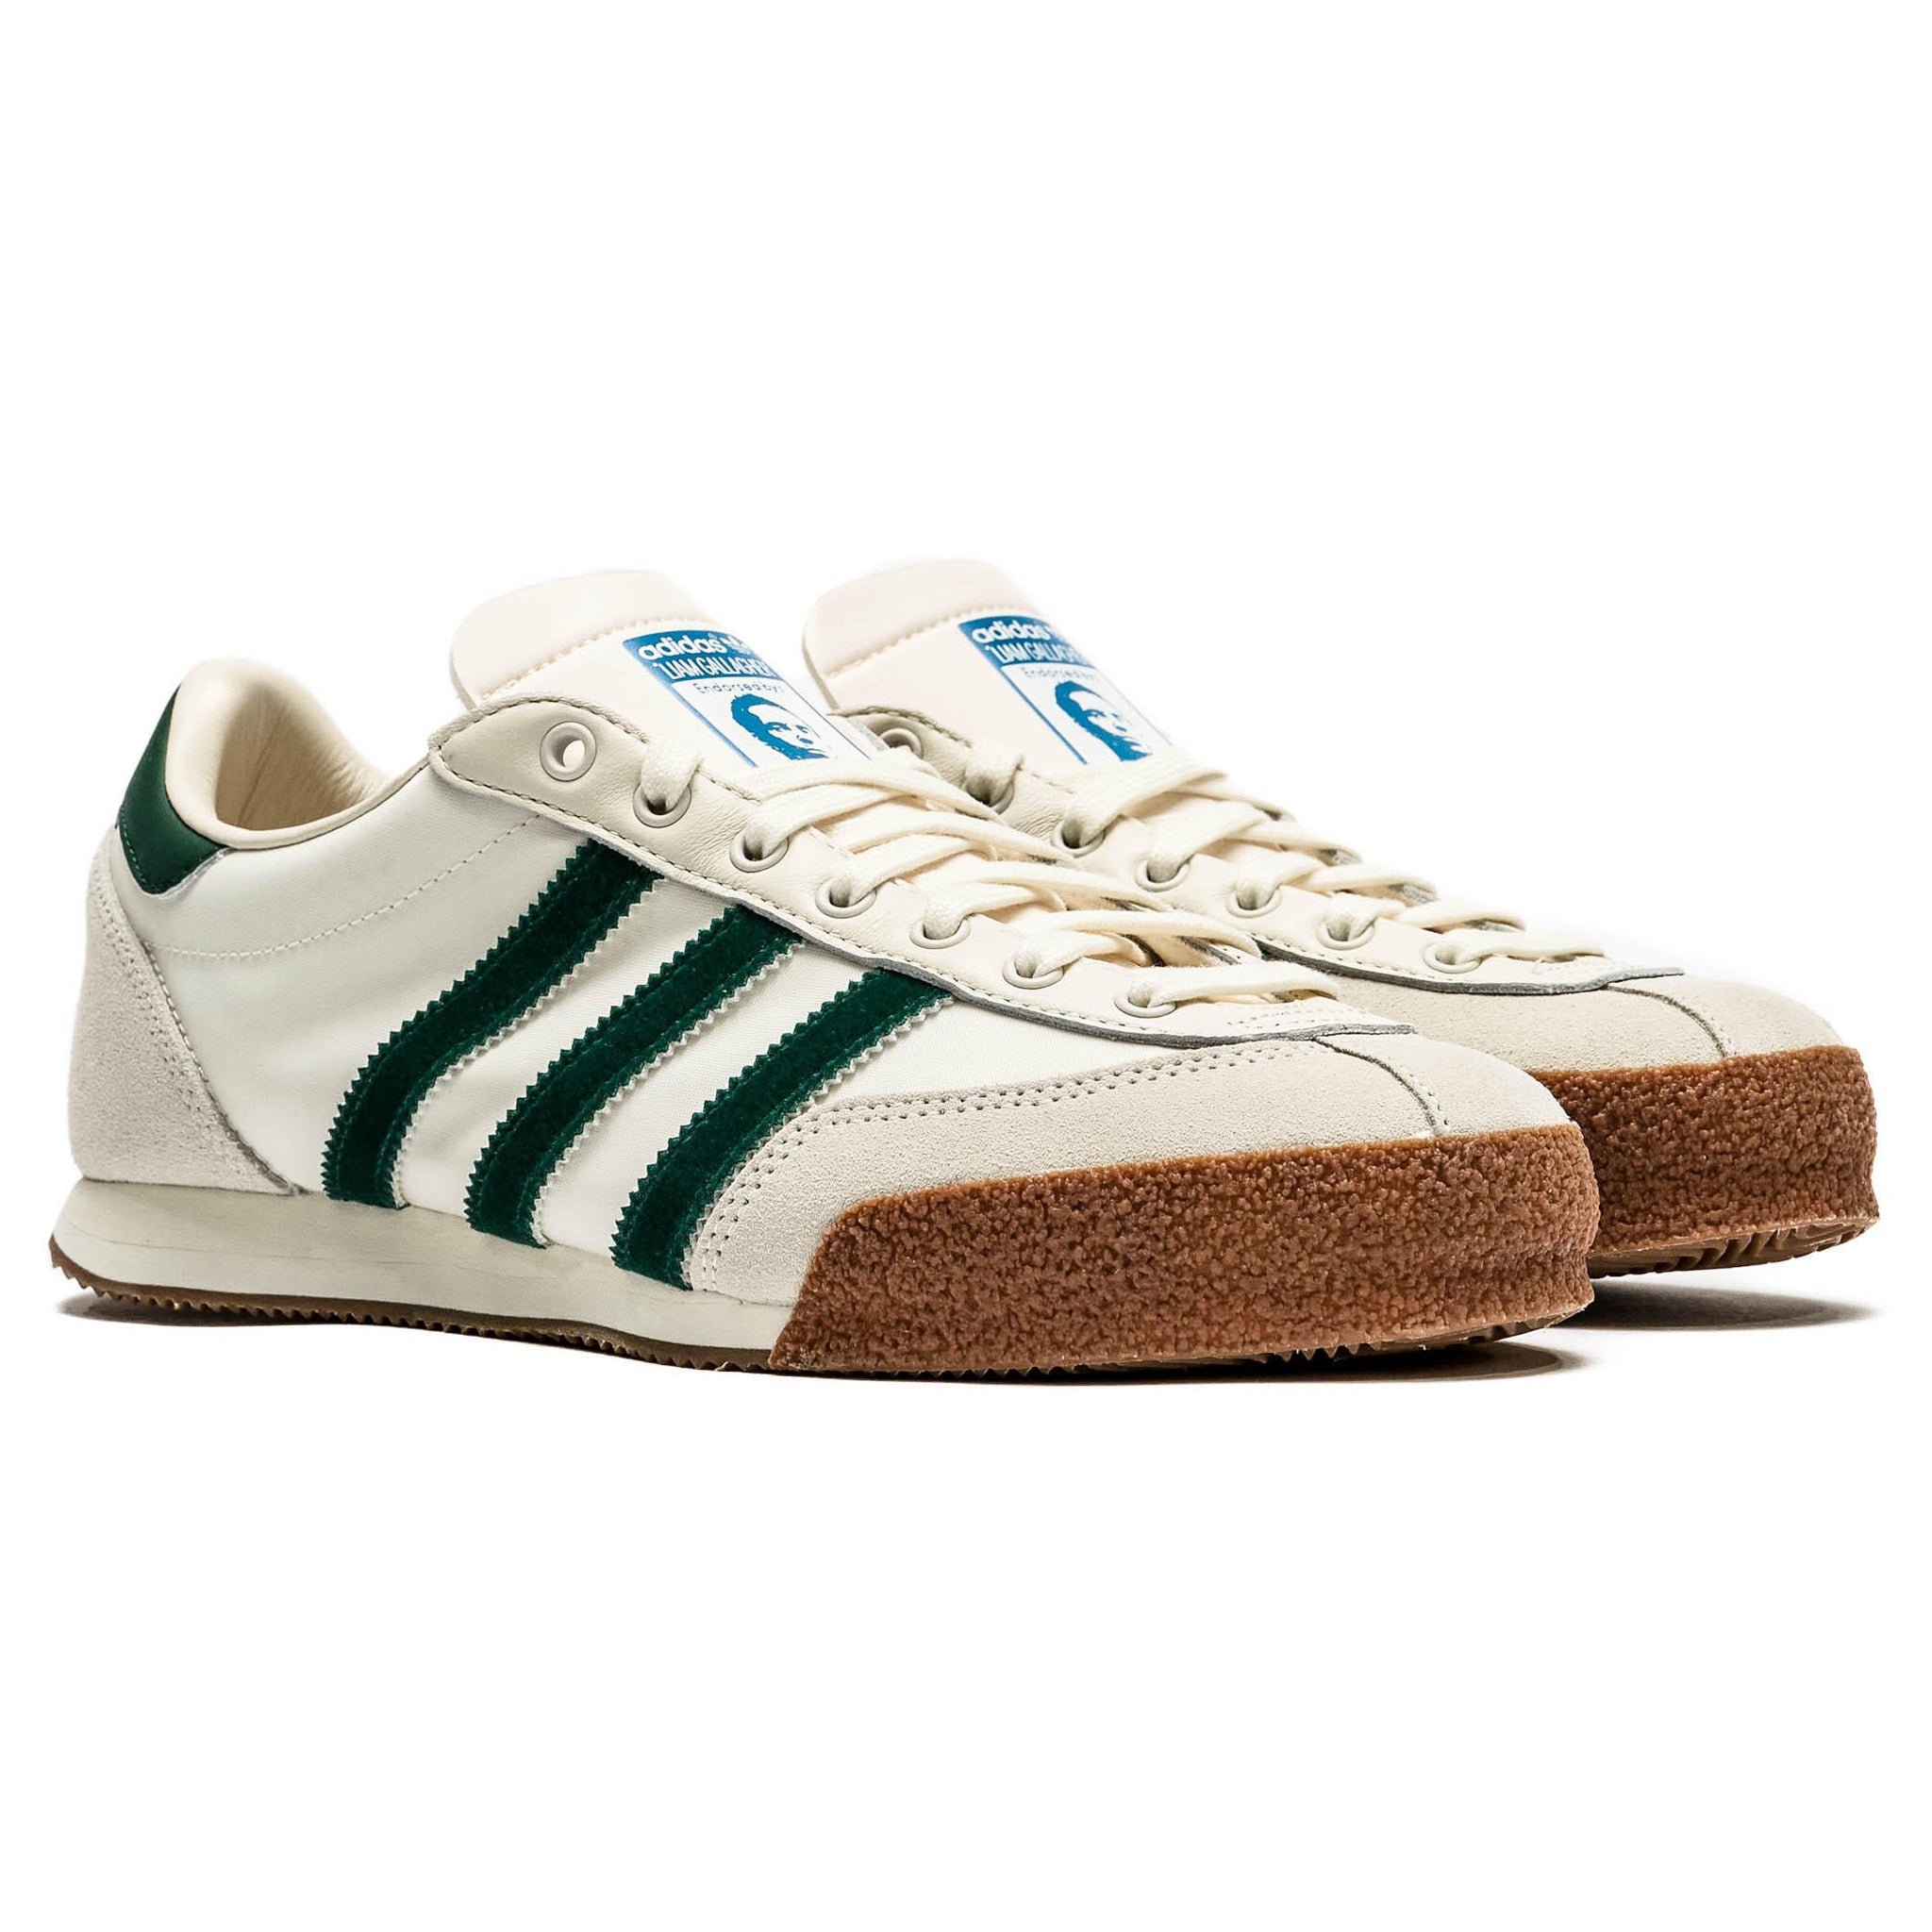 Front View of Liam Gallagher x Adidas Spezial LG2 Bottle Green IF8358